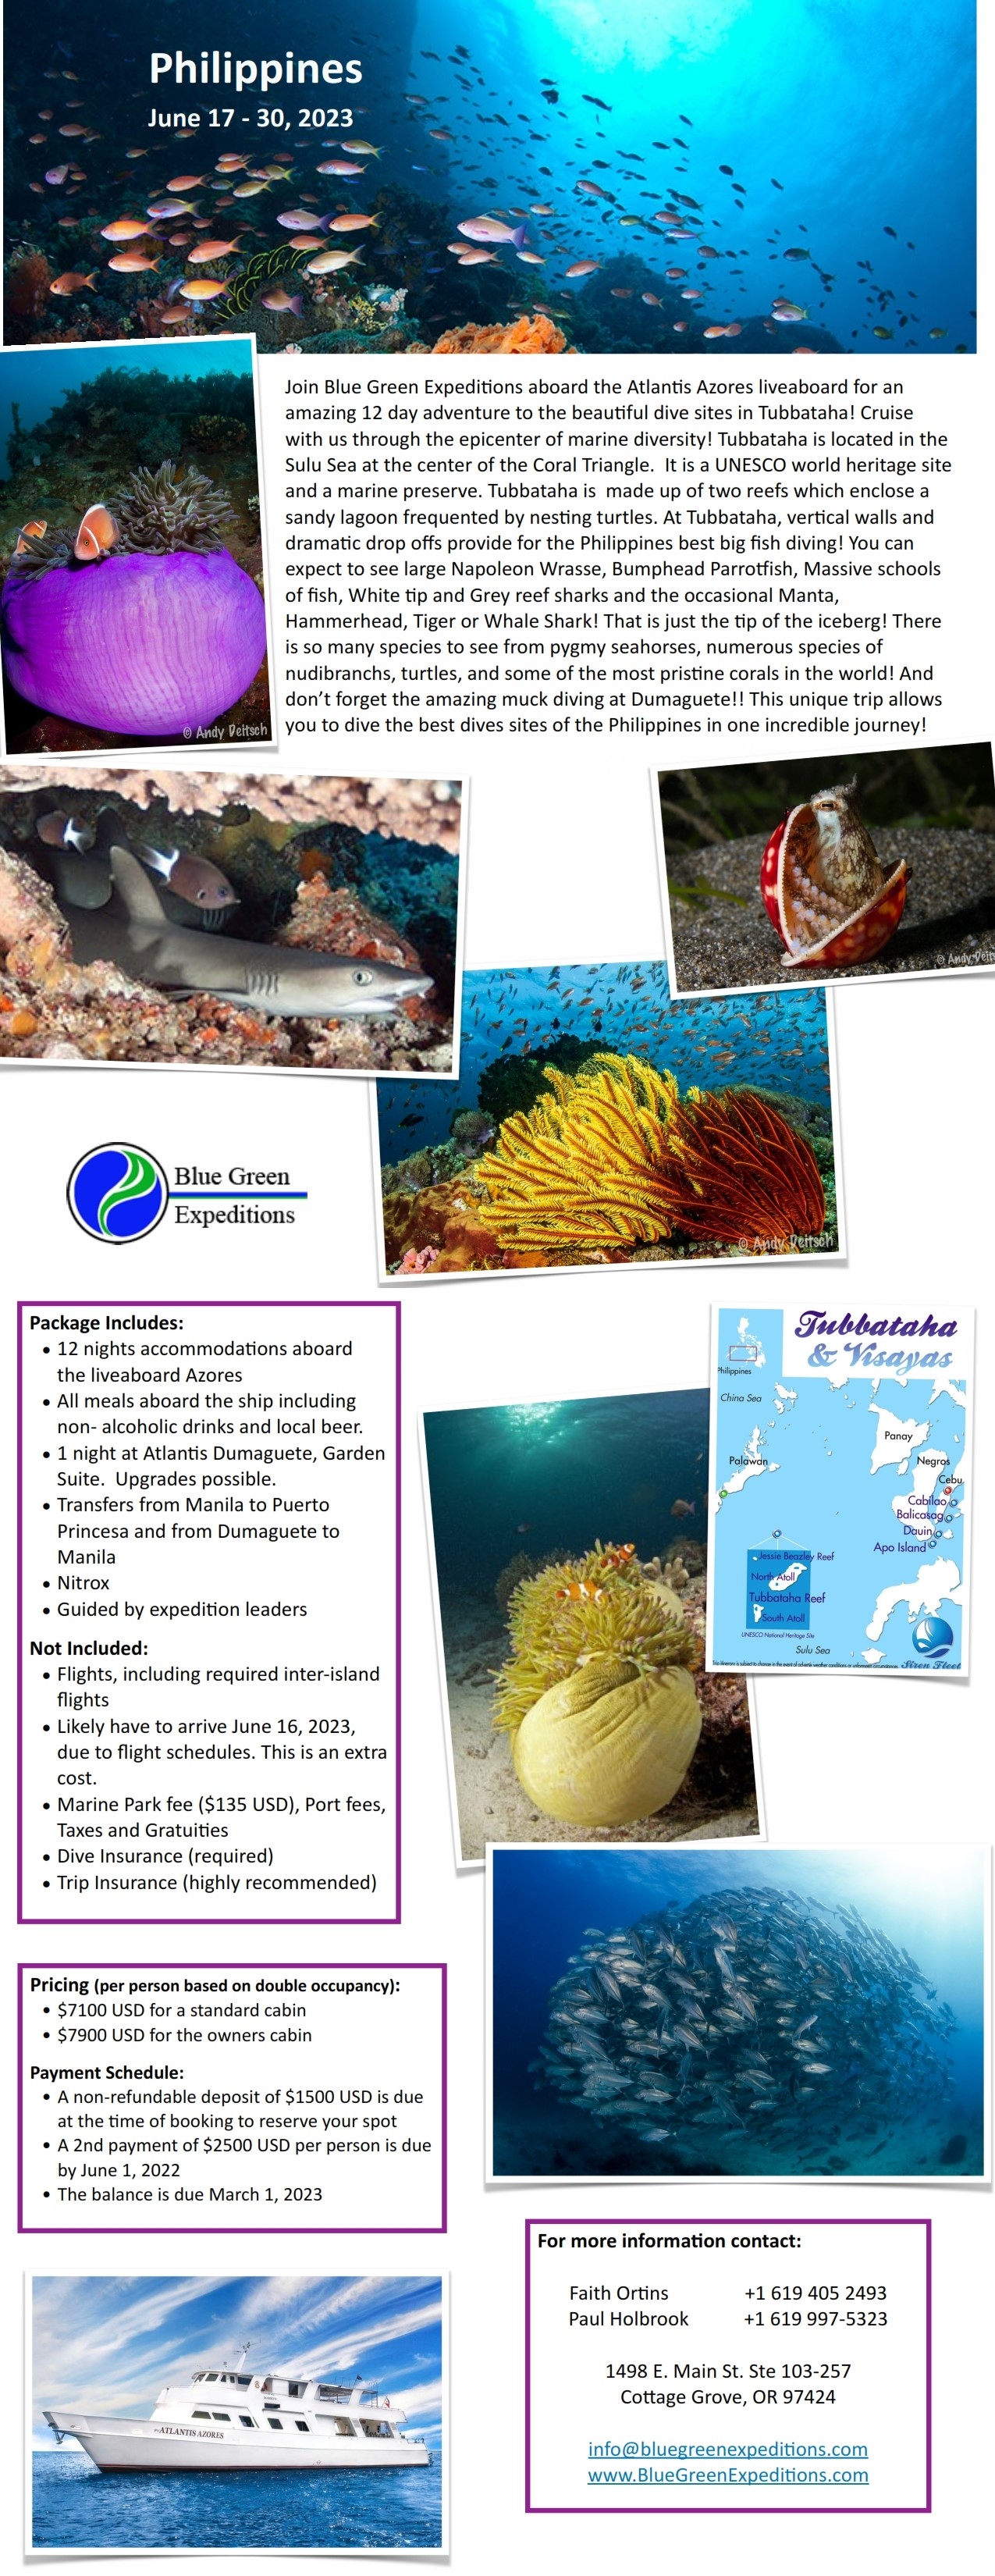 Philippines Tubbataha expedition - June 17 - 30, 2023, cost and trip details. PDF flyer contains the same information.